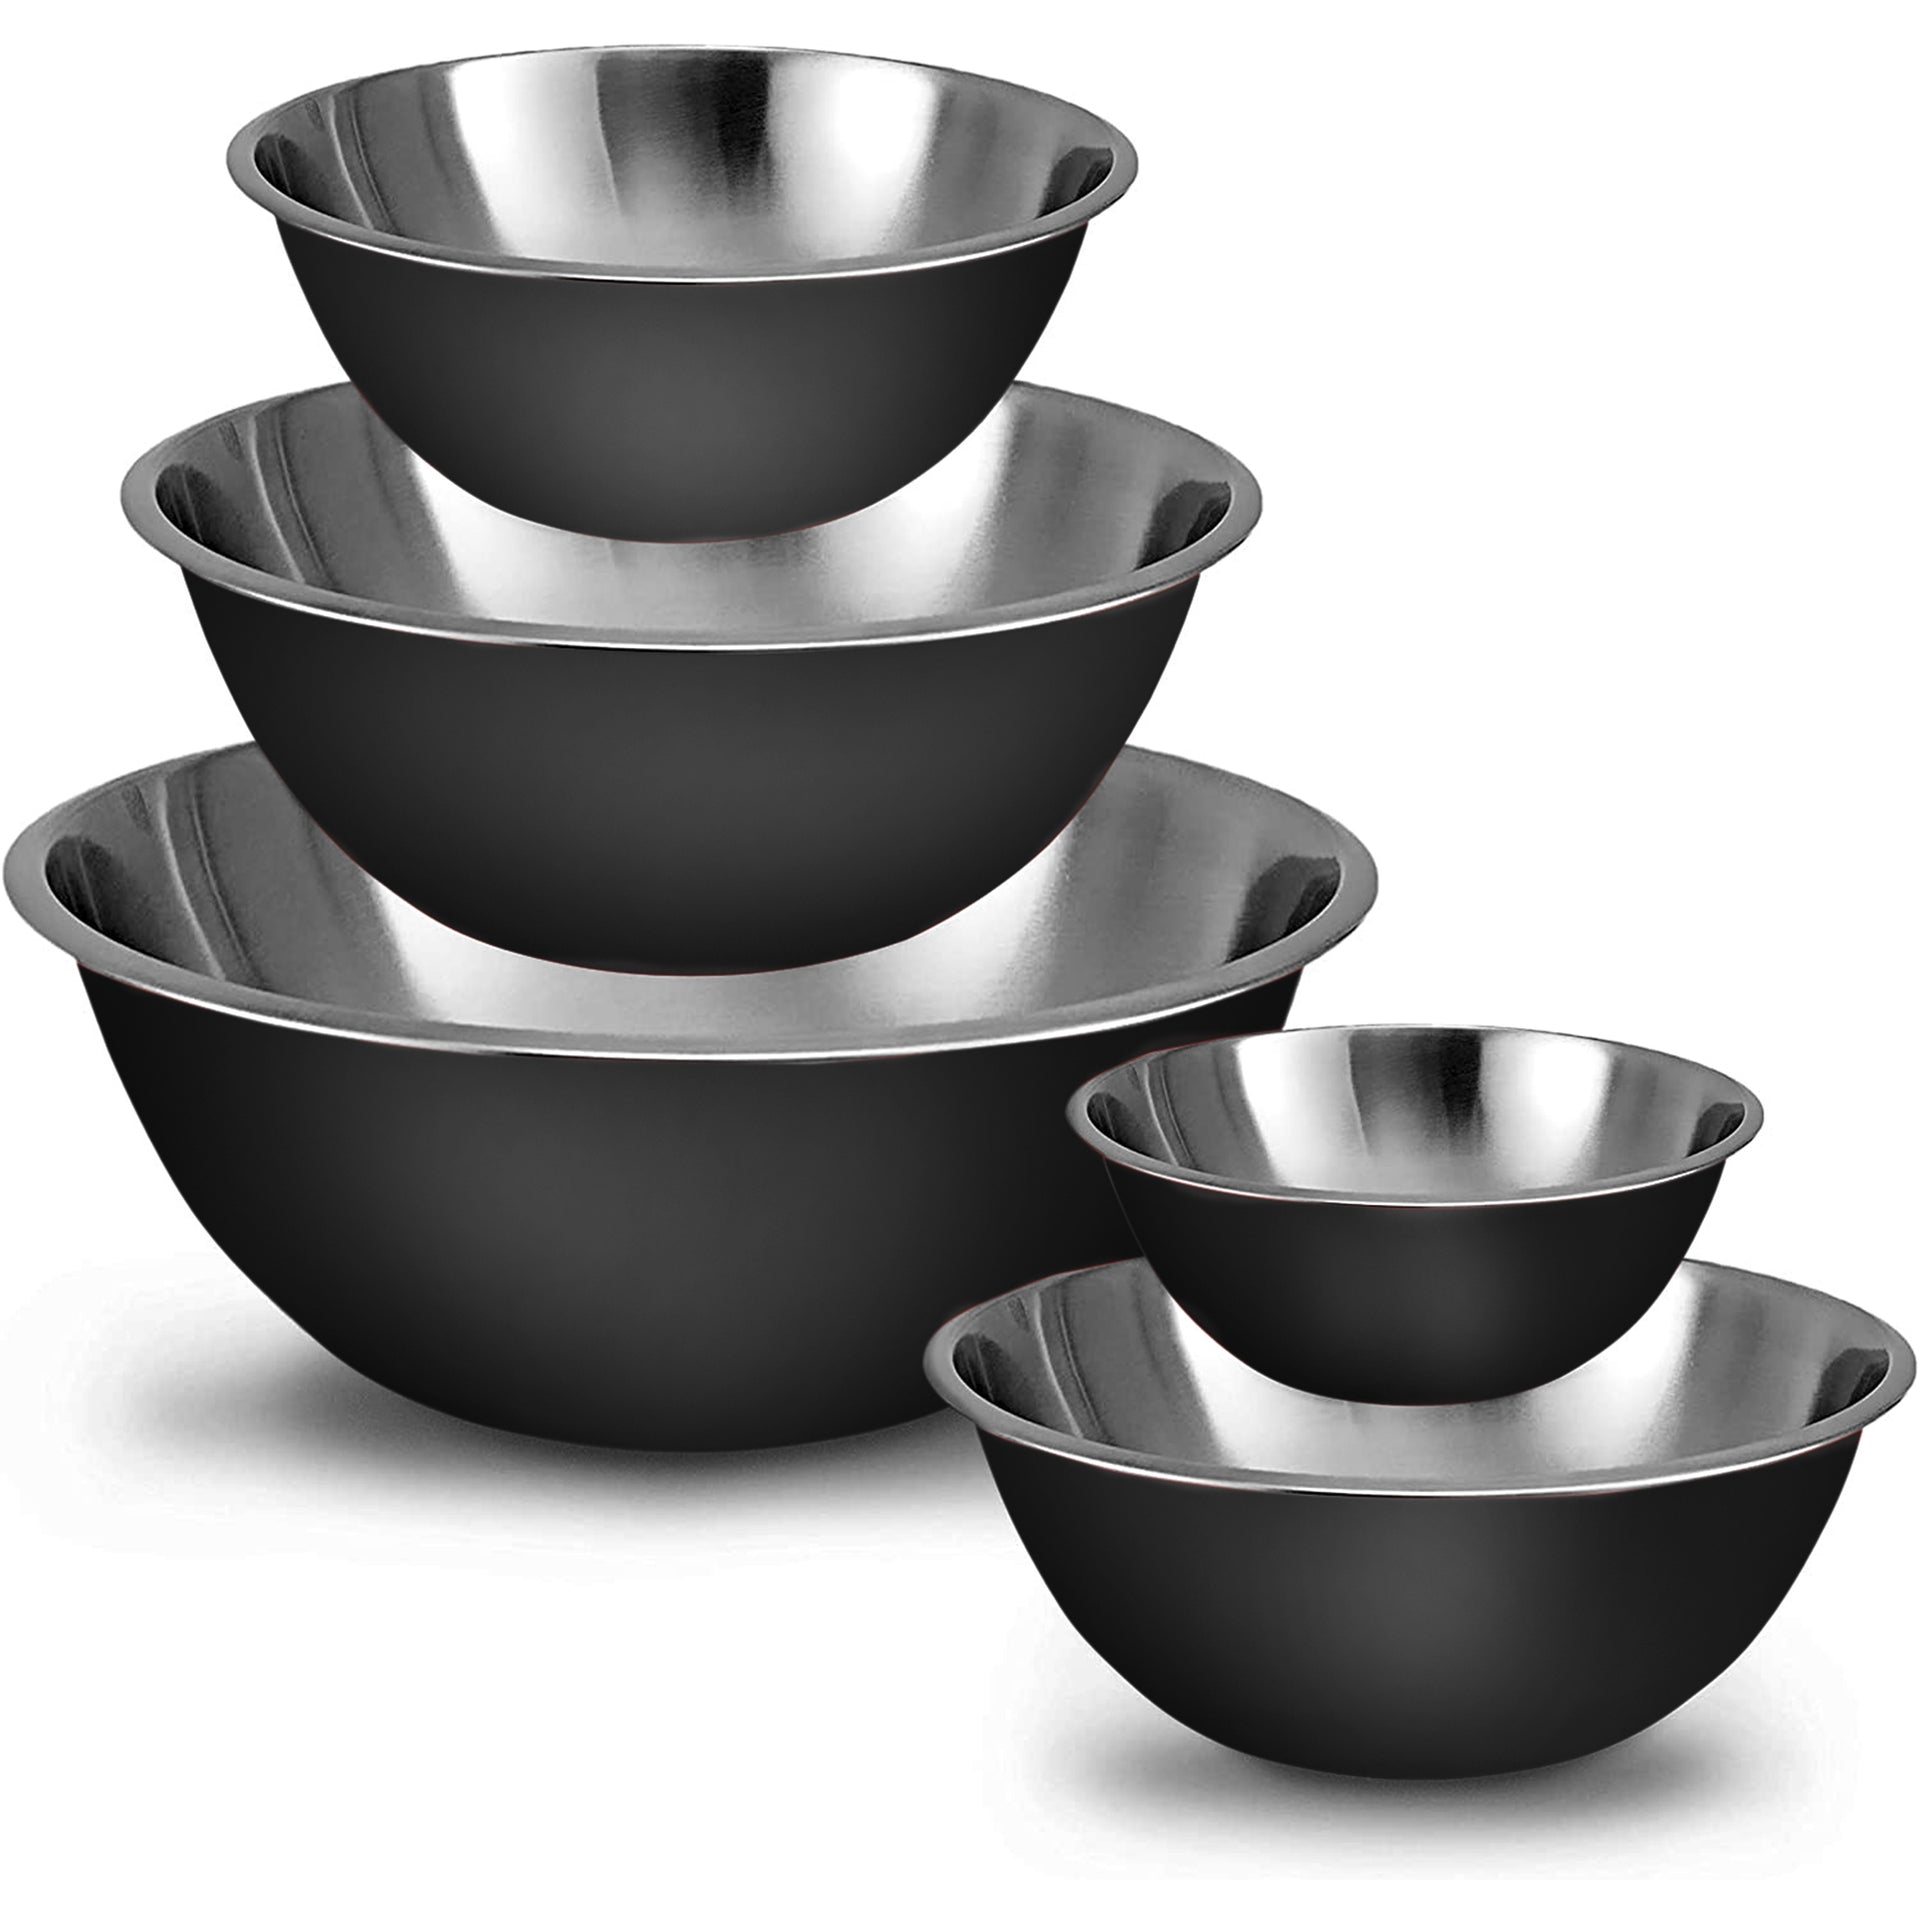 Whysko Stainless Steel Mixing Bowls with Lids Set, 5 Sizes Nesting Mixing Bowls for Your Kitchen Meal Prep, Cooking, Baking, and Food Storage (Red